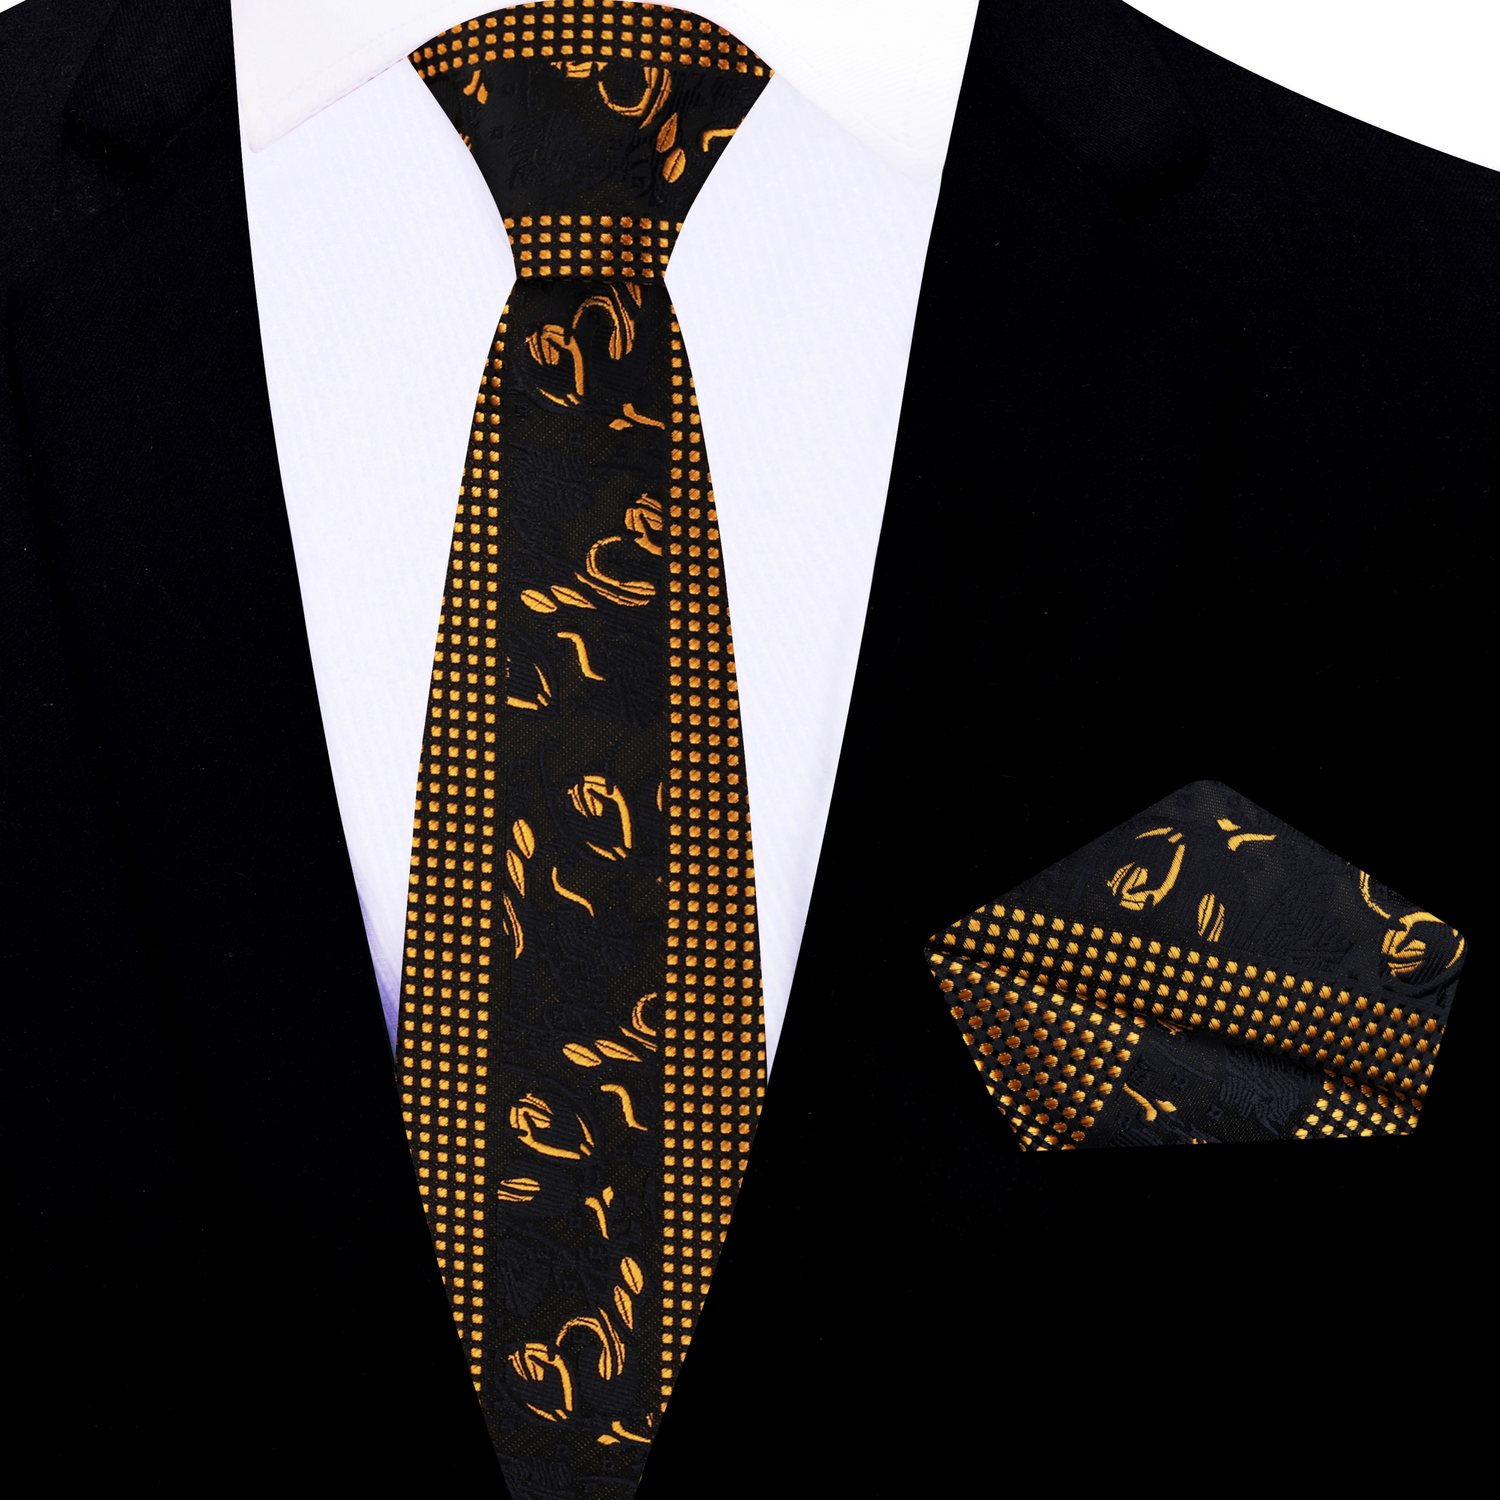 Thin Tie: Black & Gold Floral and Check Necktie with Matching Square